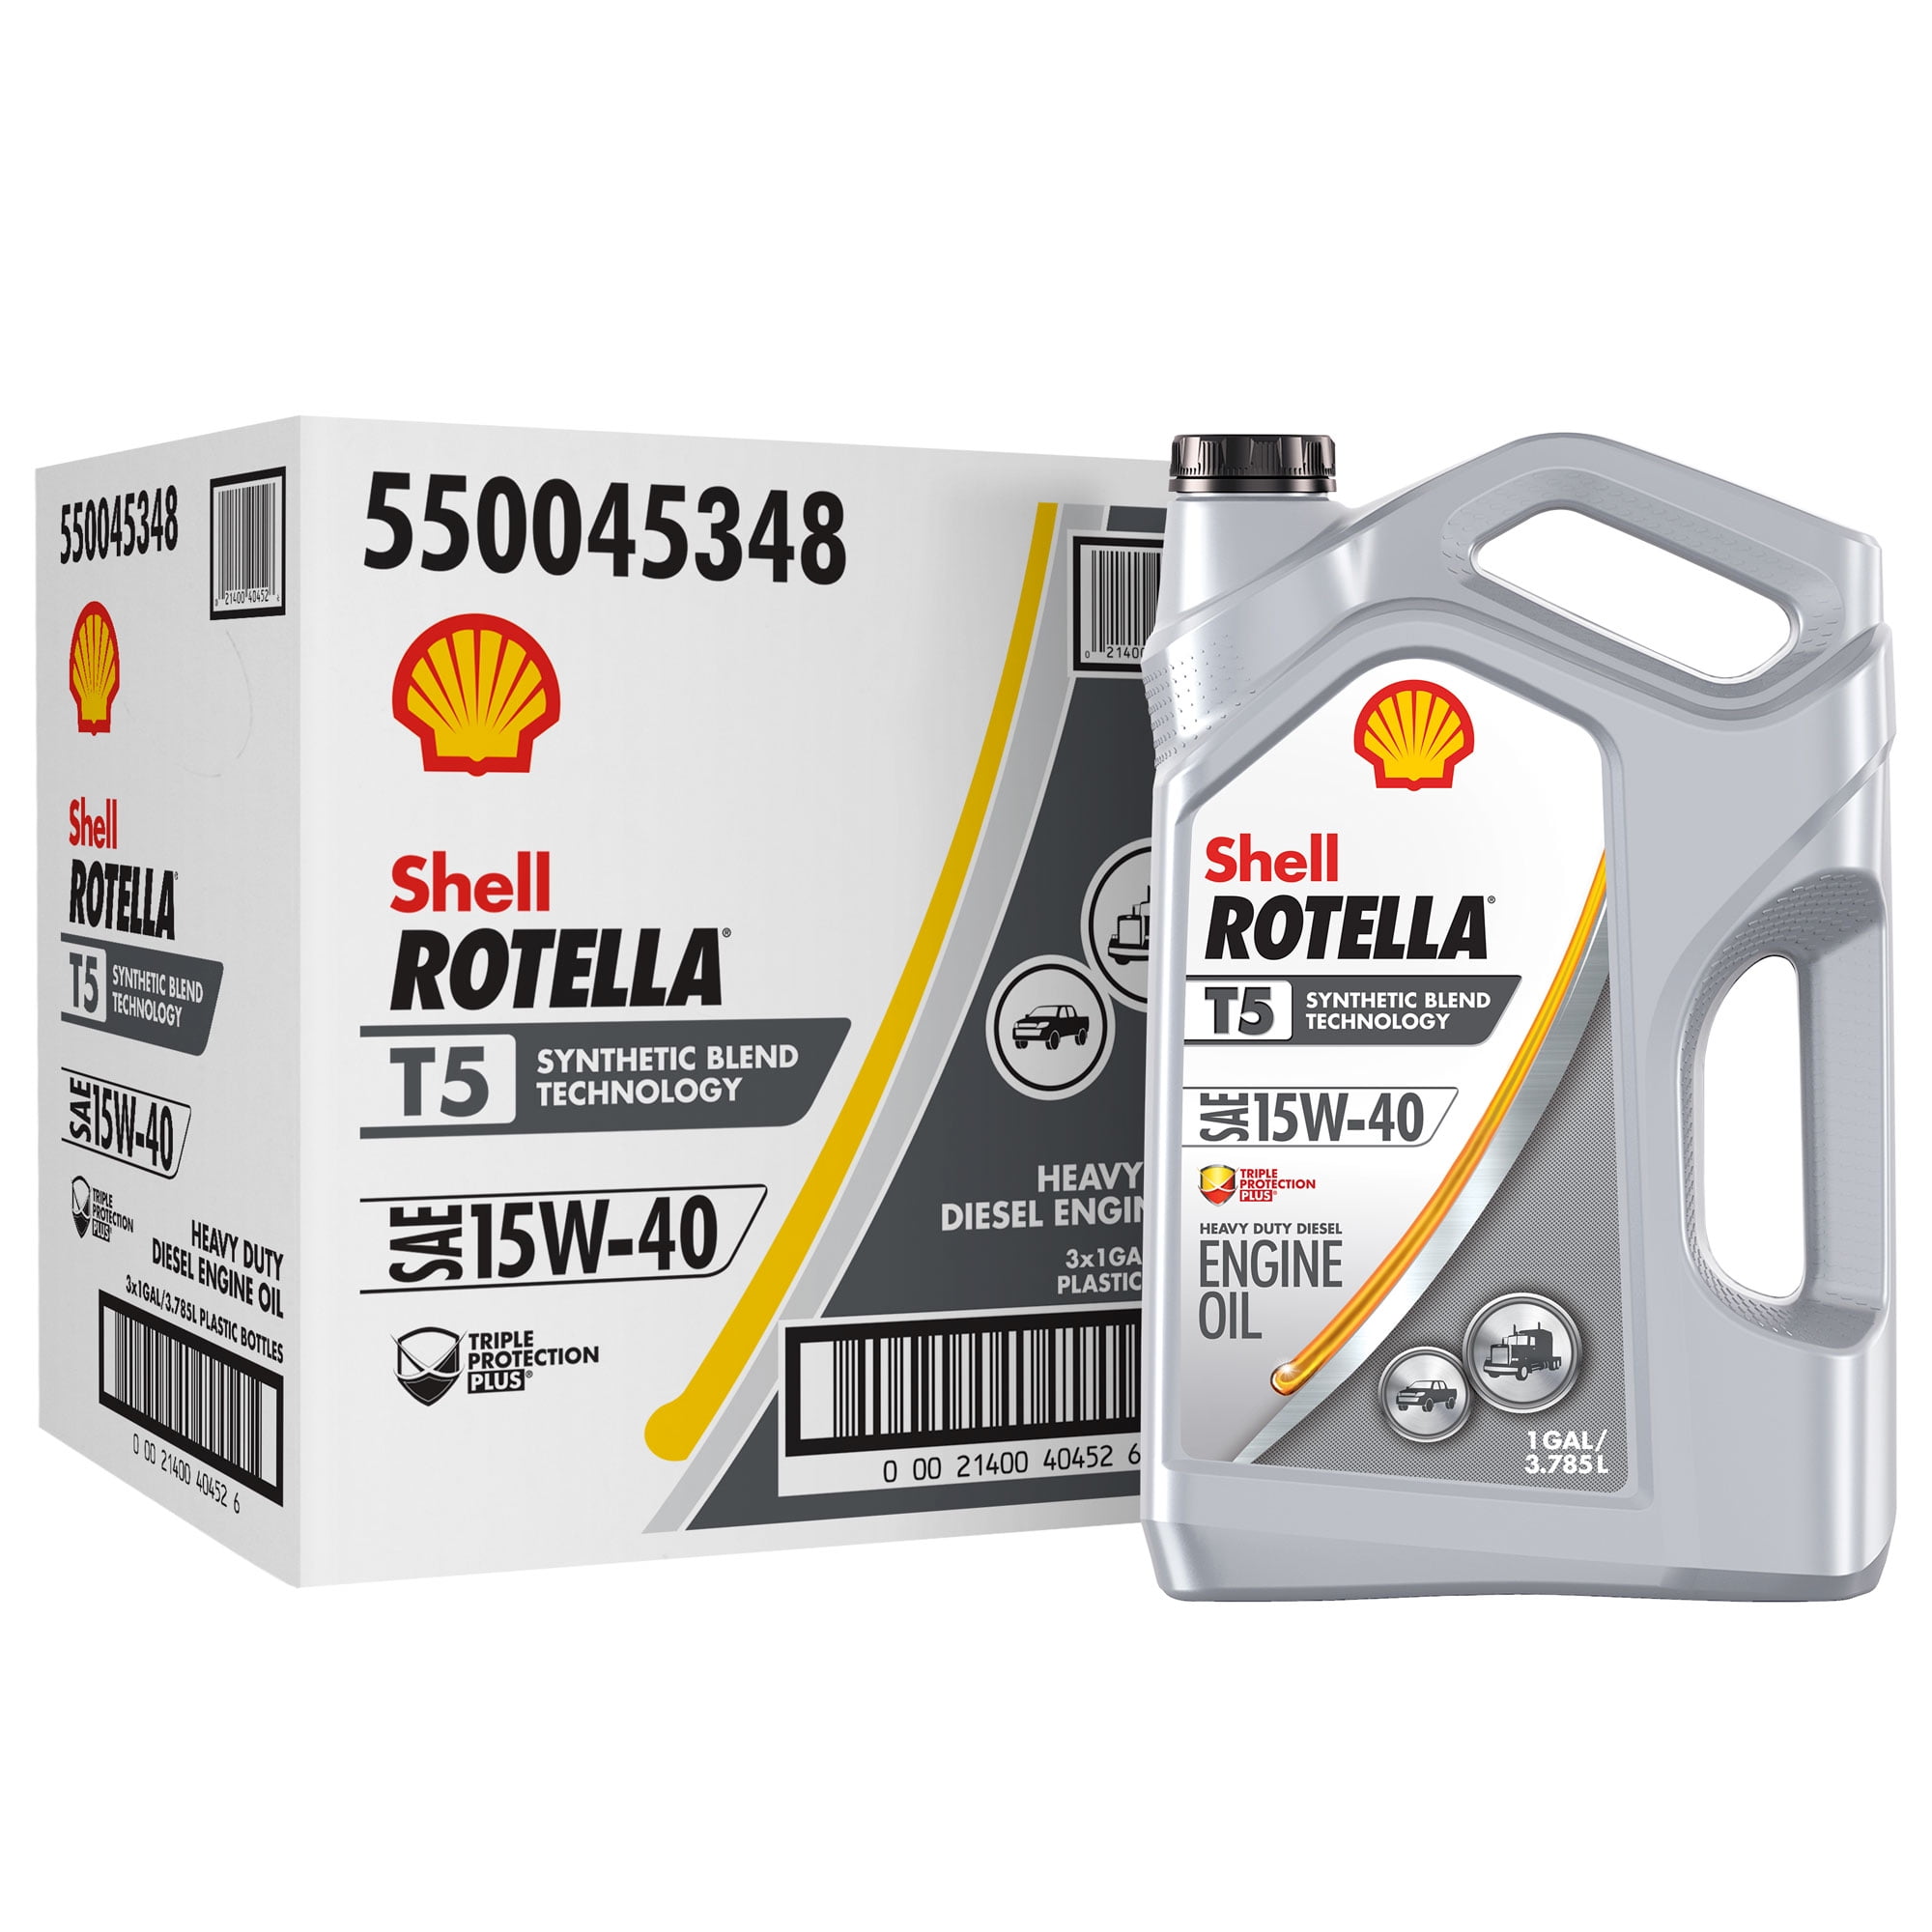 Is Rotella T5 Good Oil